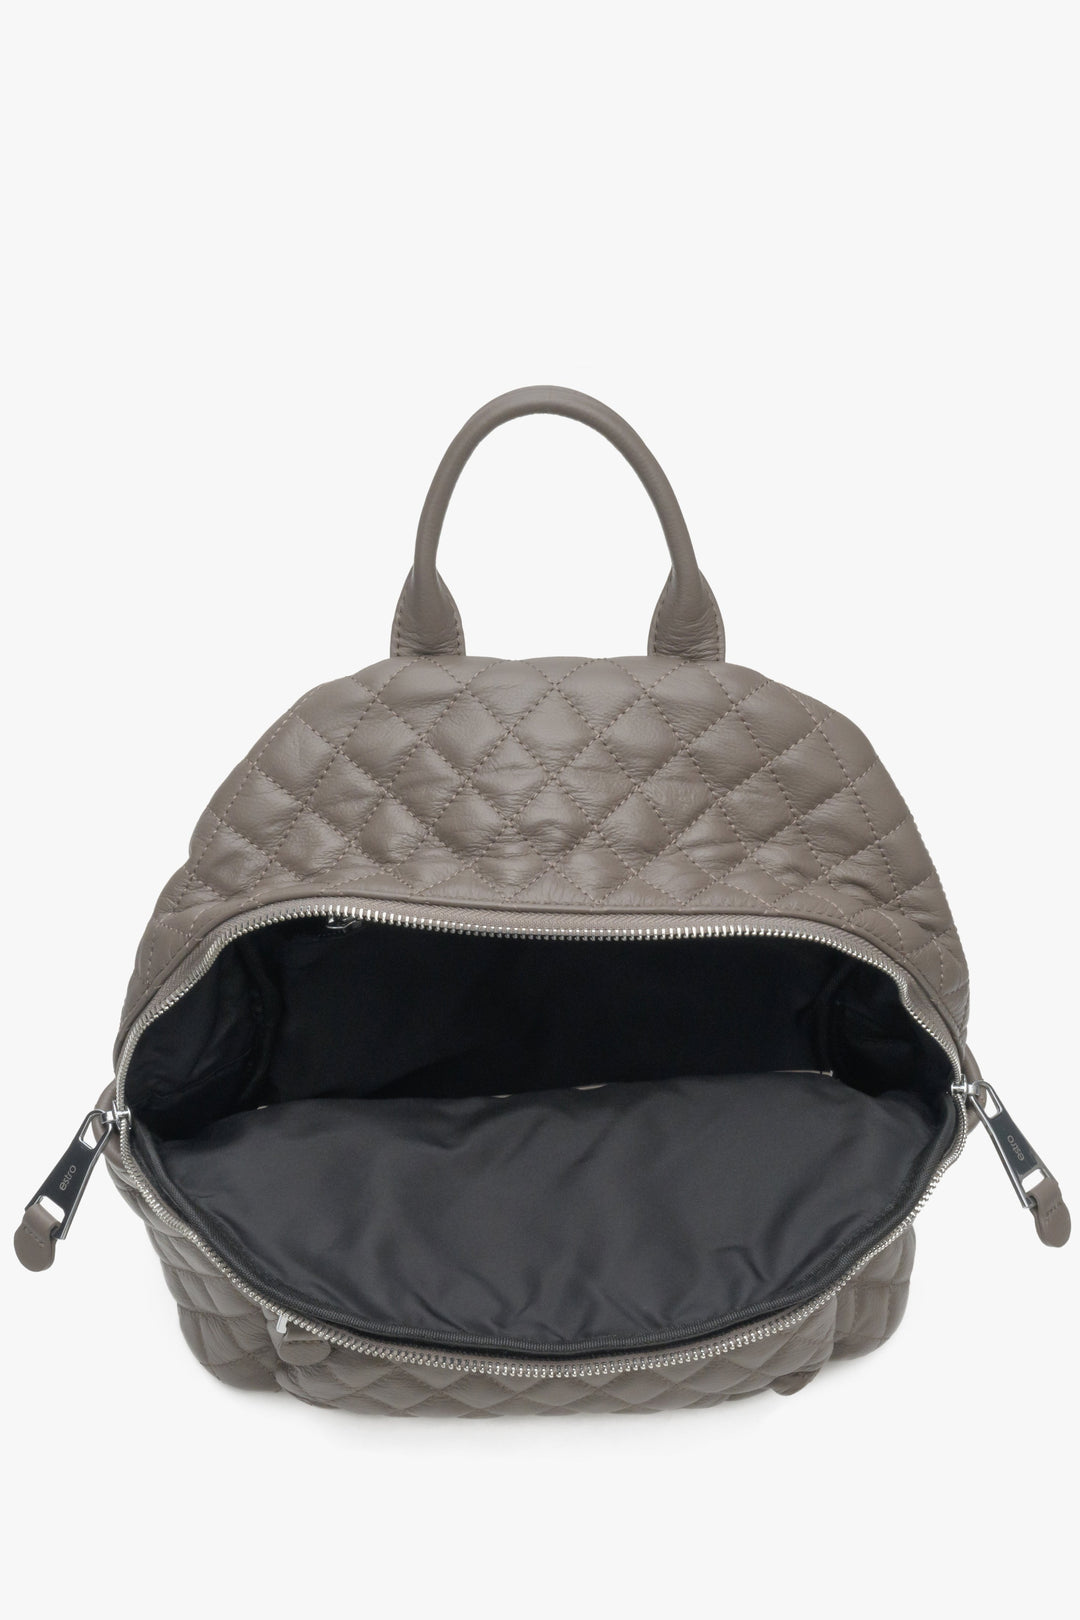 Urban, leather women's backpack in grey colour - close-up of the interior of the model.